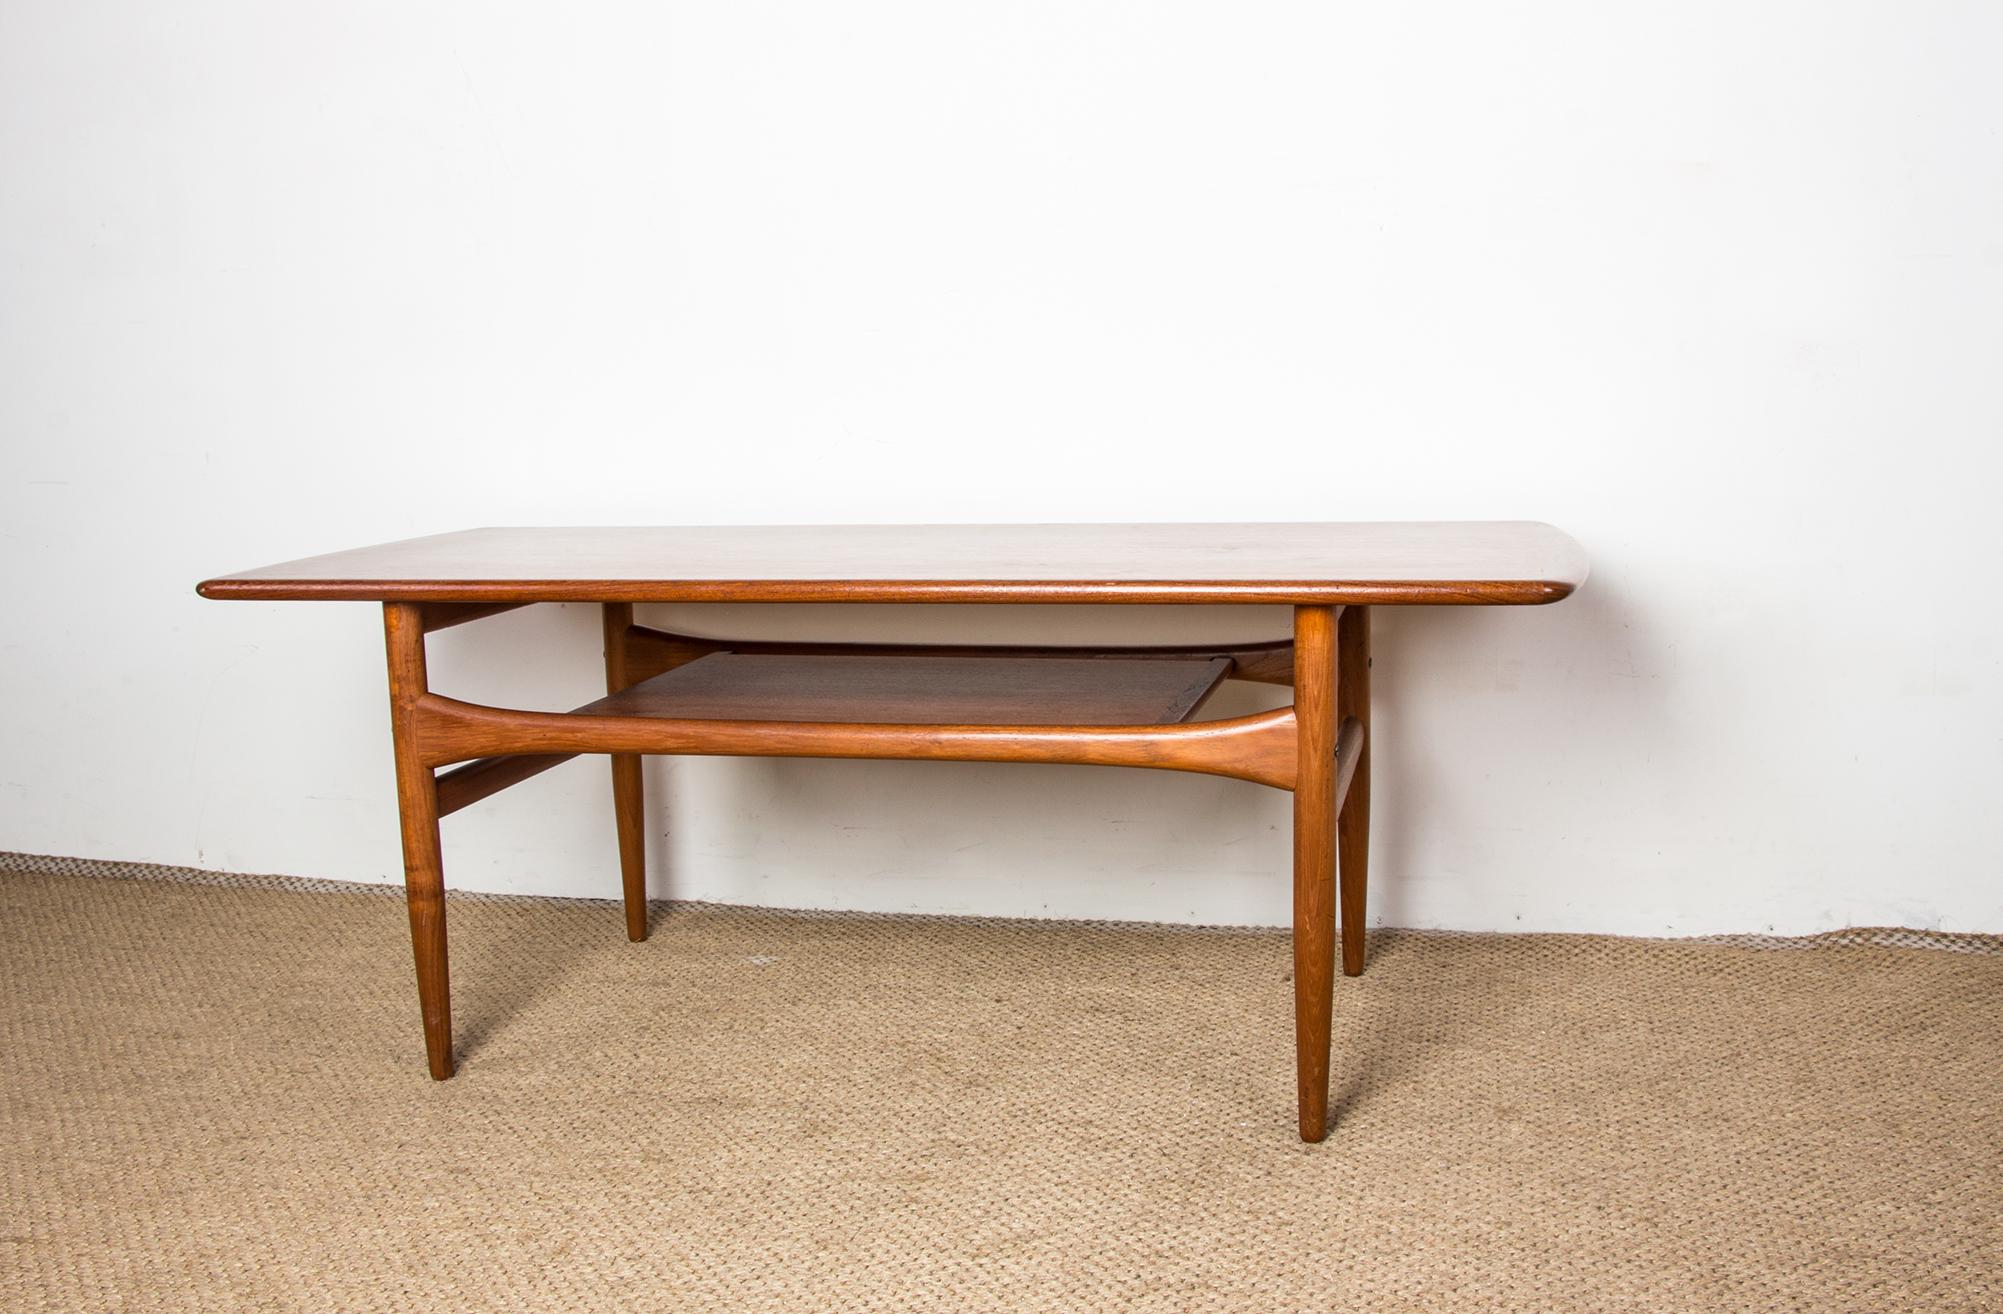 Mid-20th Century Danish coffee table, 2 levels, in Teak by Robert Christensen for Arrebo Mobler. For Sale